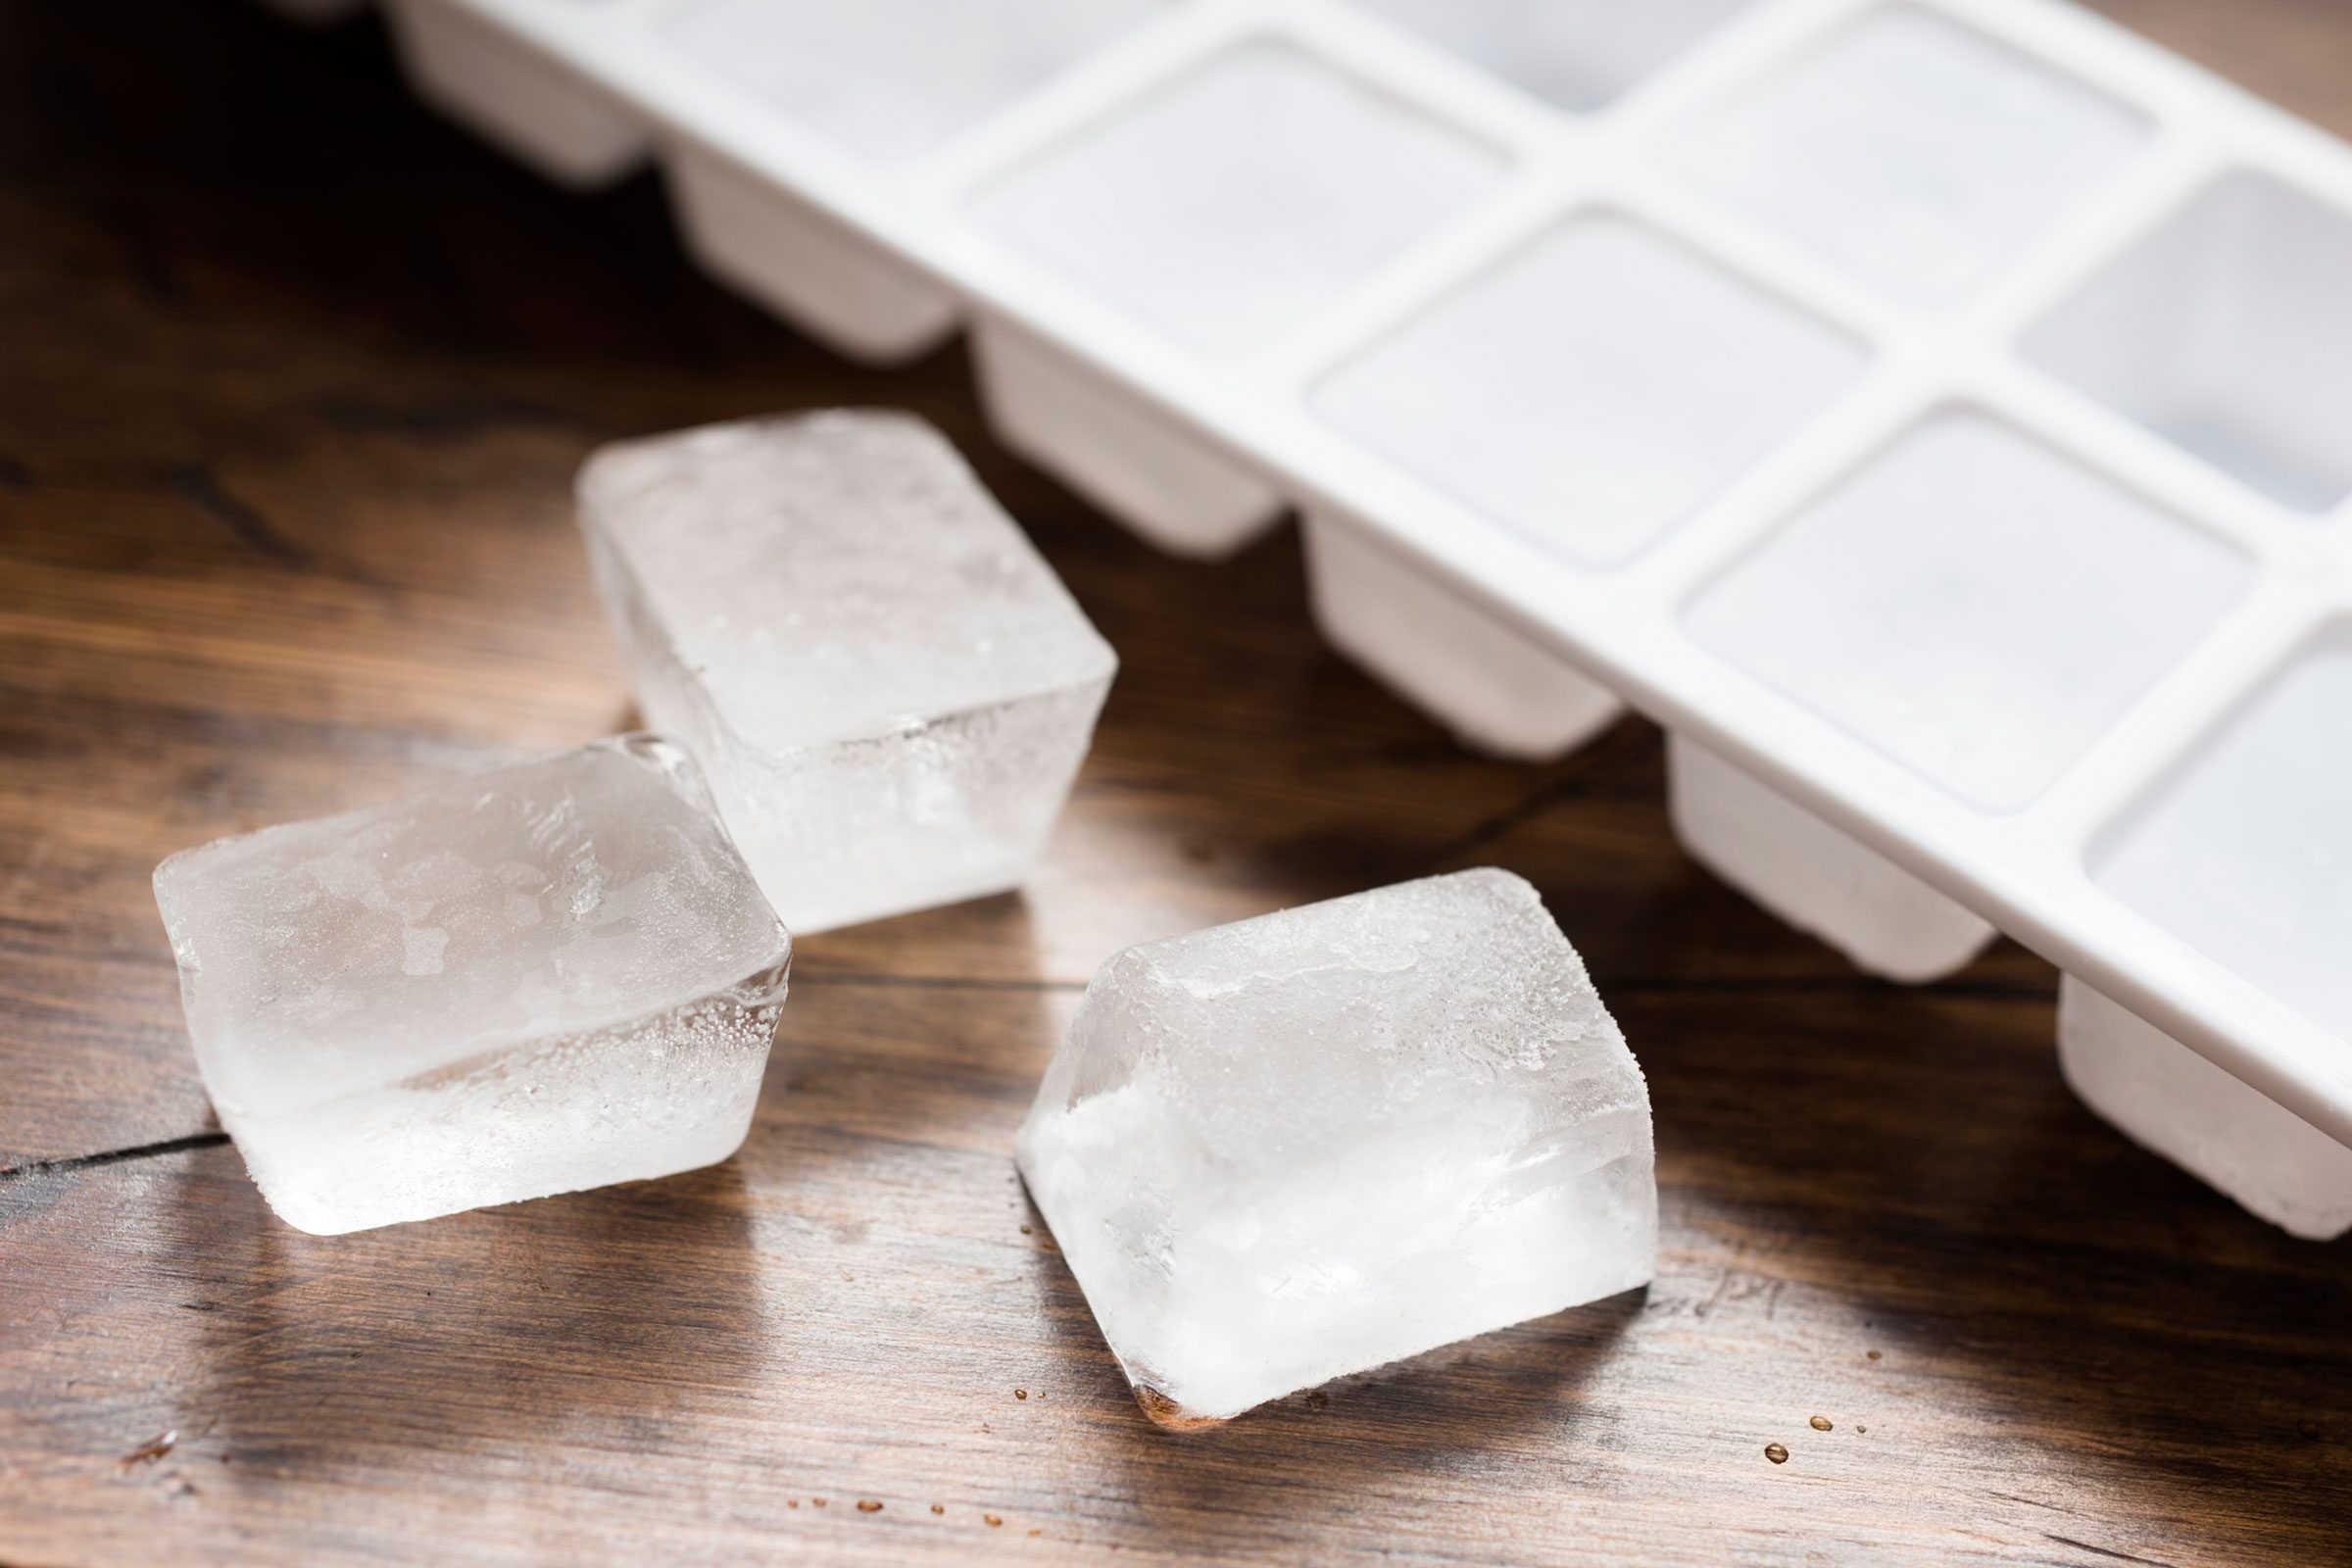 Find it tricky to get ice cube trays into the freezer without